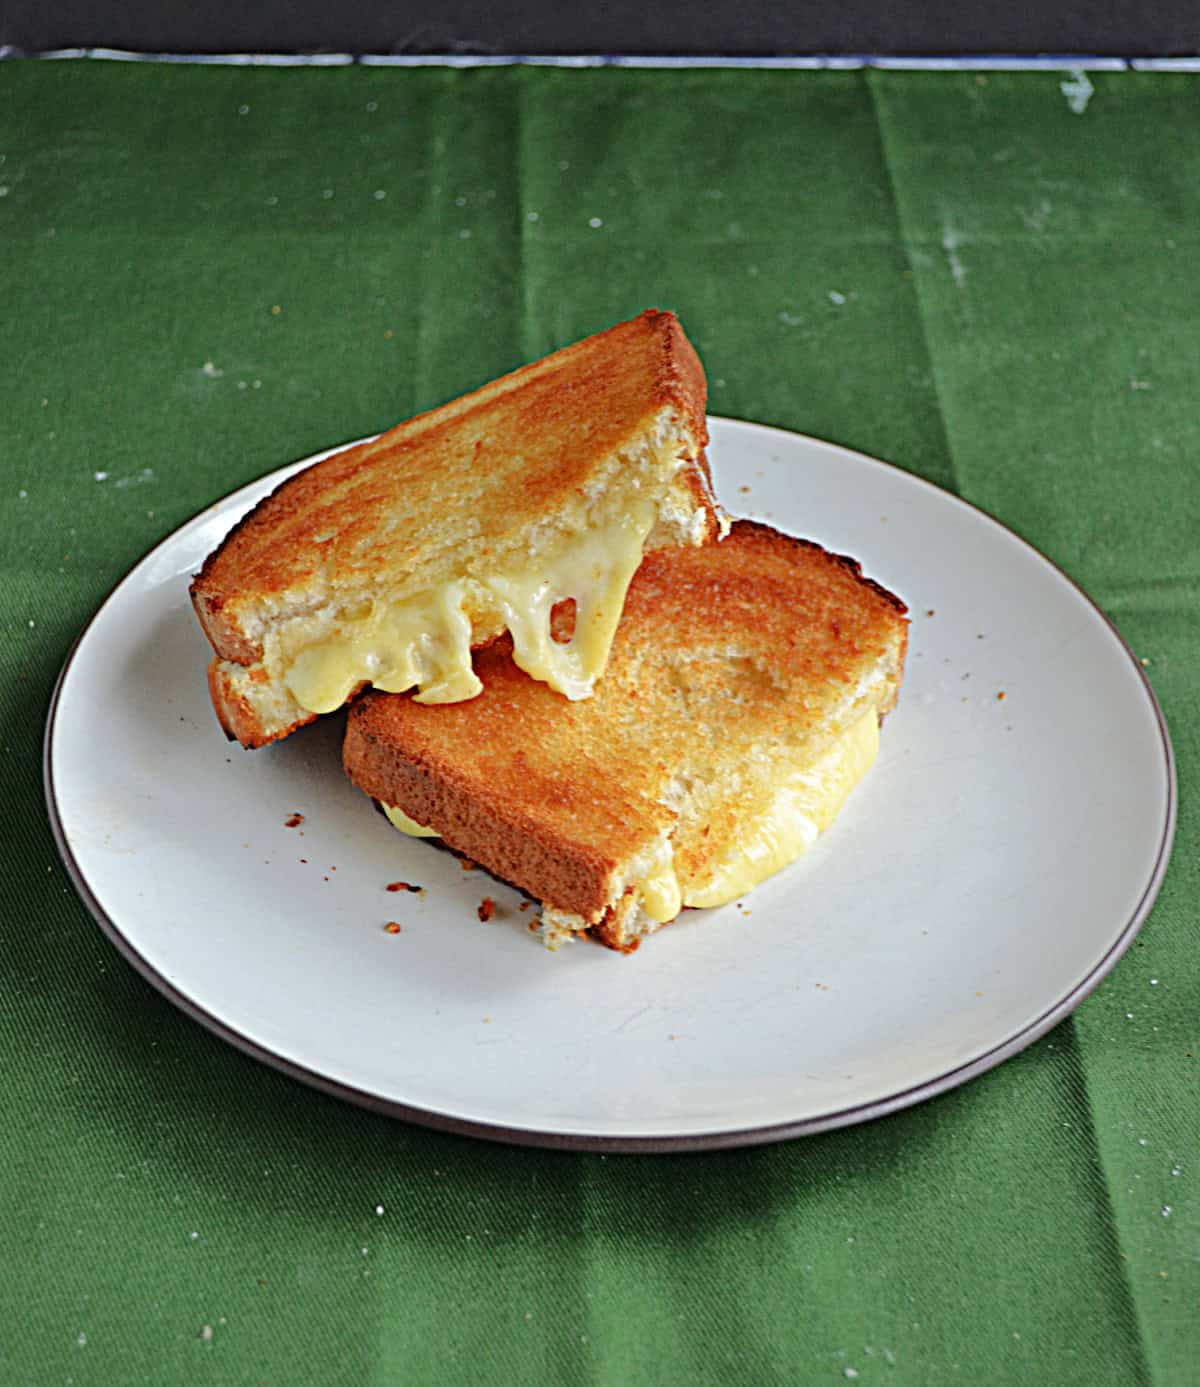 Two grilled cheese halves with the cheese melting out of it on a plate.